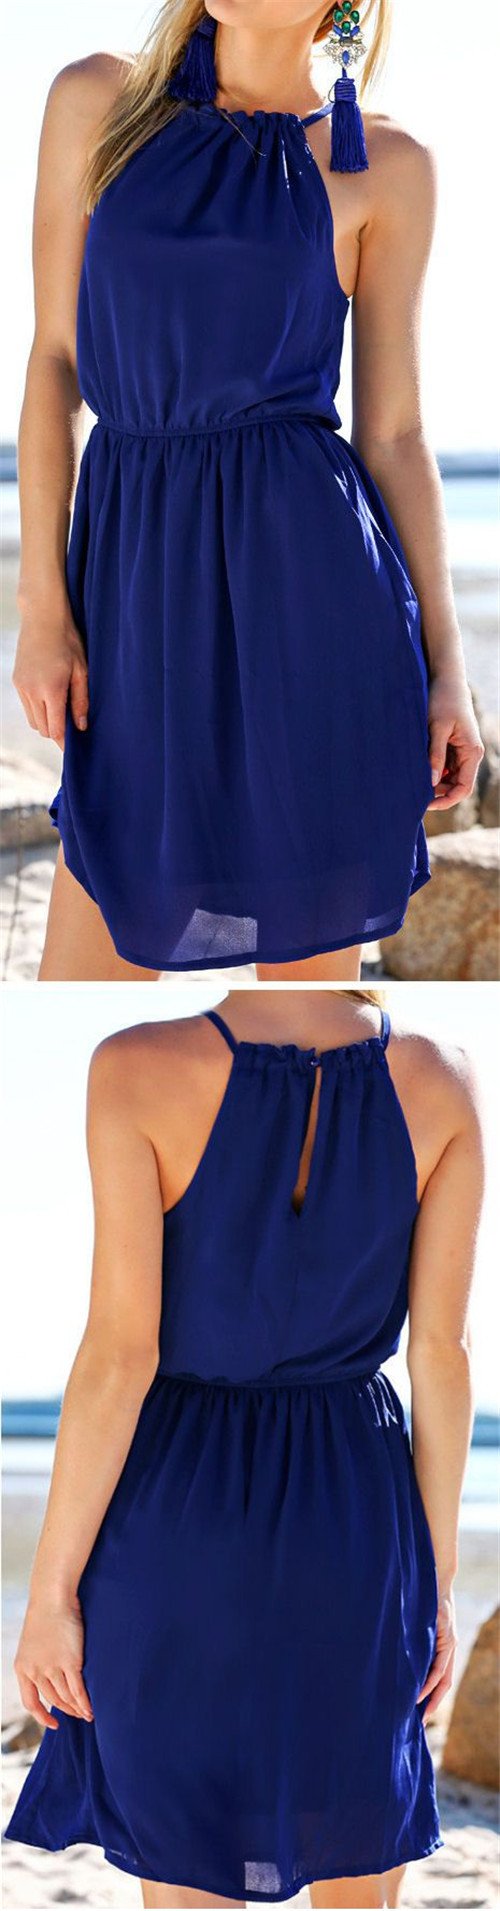 Pure Color O-neck Backless Sleeveless Short Dress - Meet Yours Fashion - 2